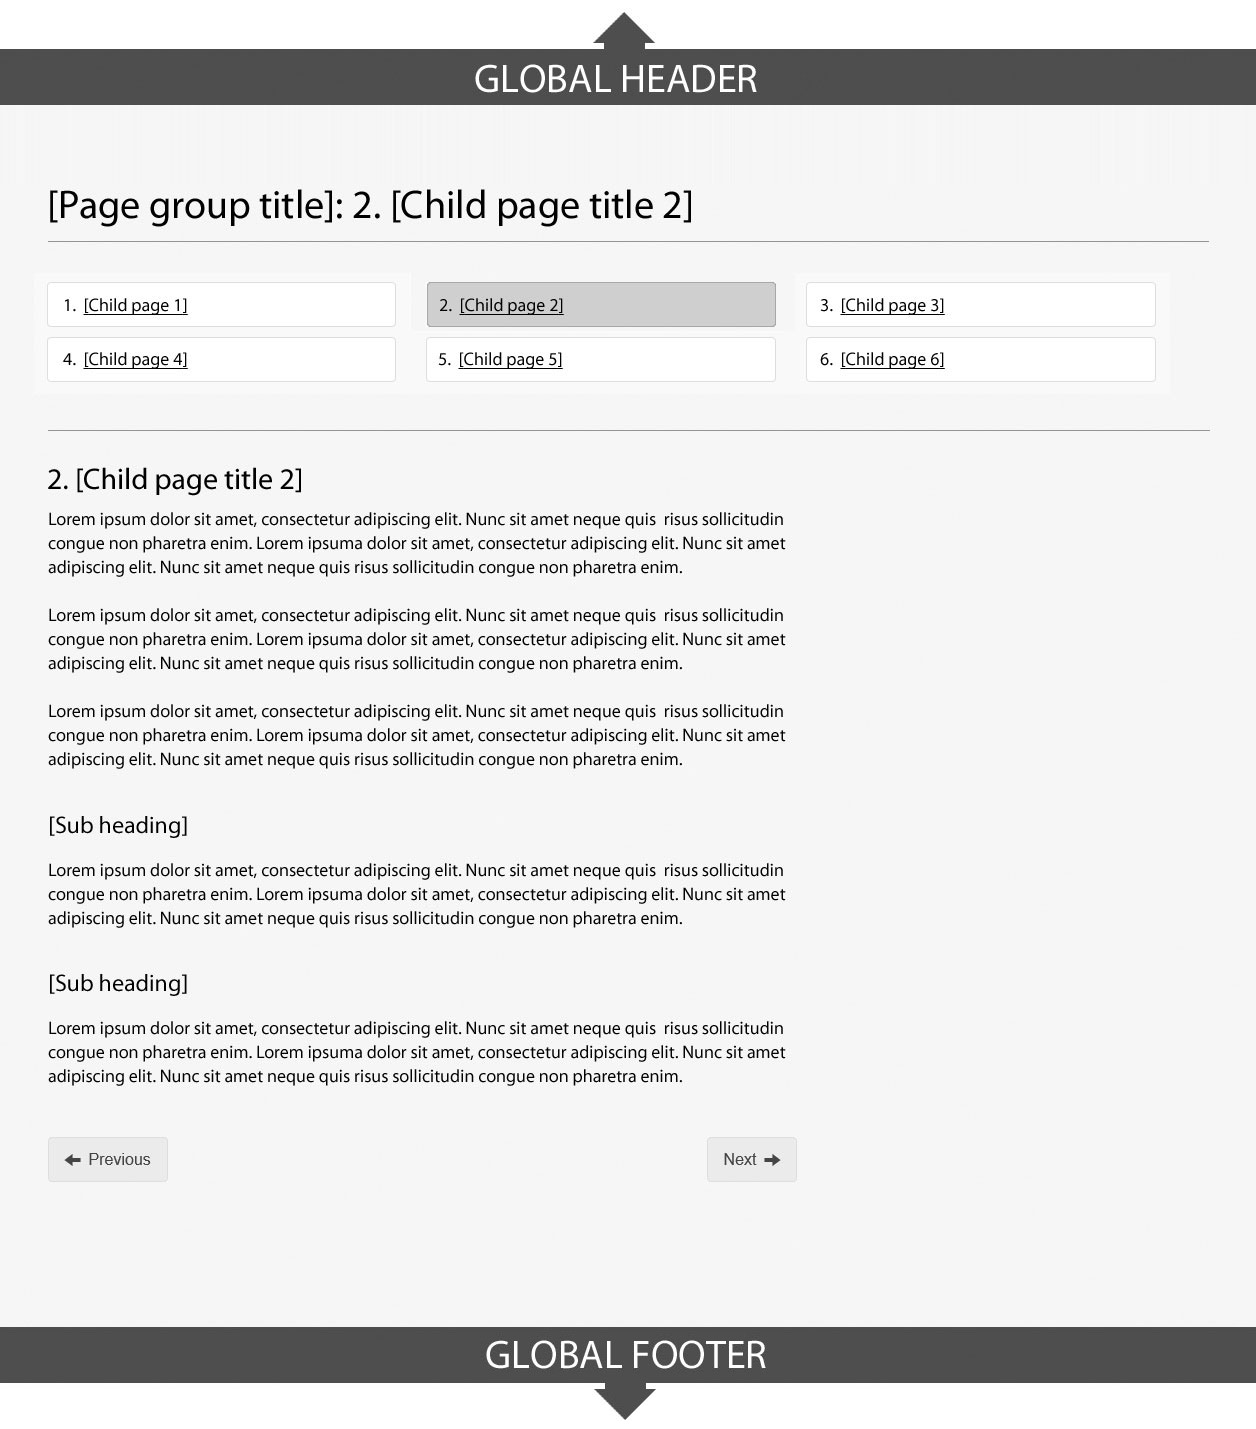 Image of ordered multi-page navigation pattern. Details on this graphic can be found in the surrounding text.